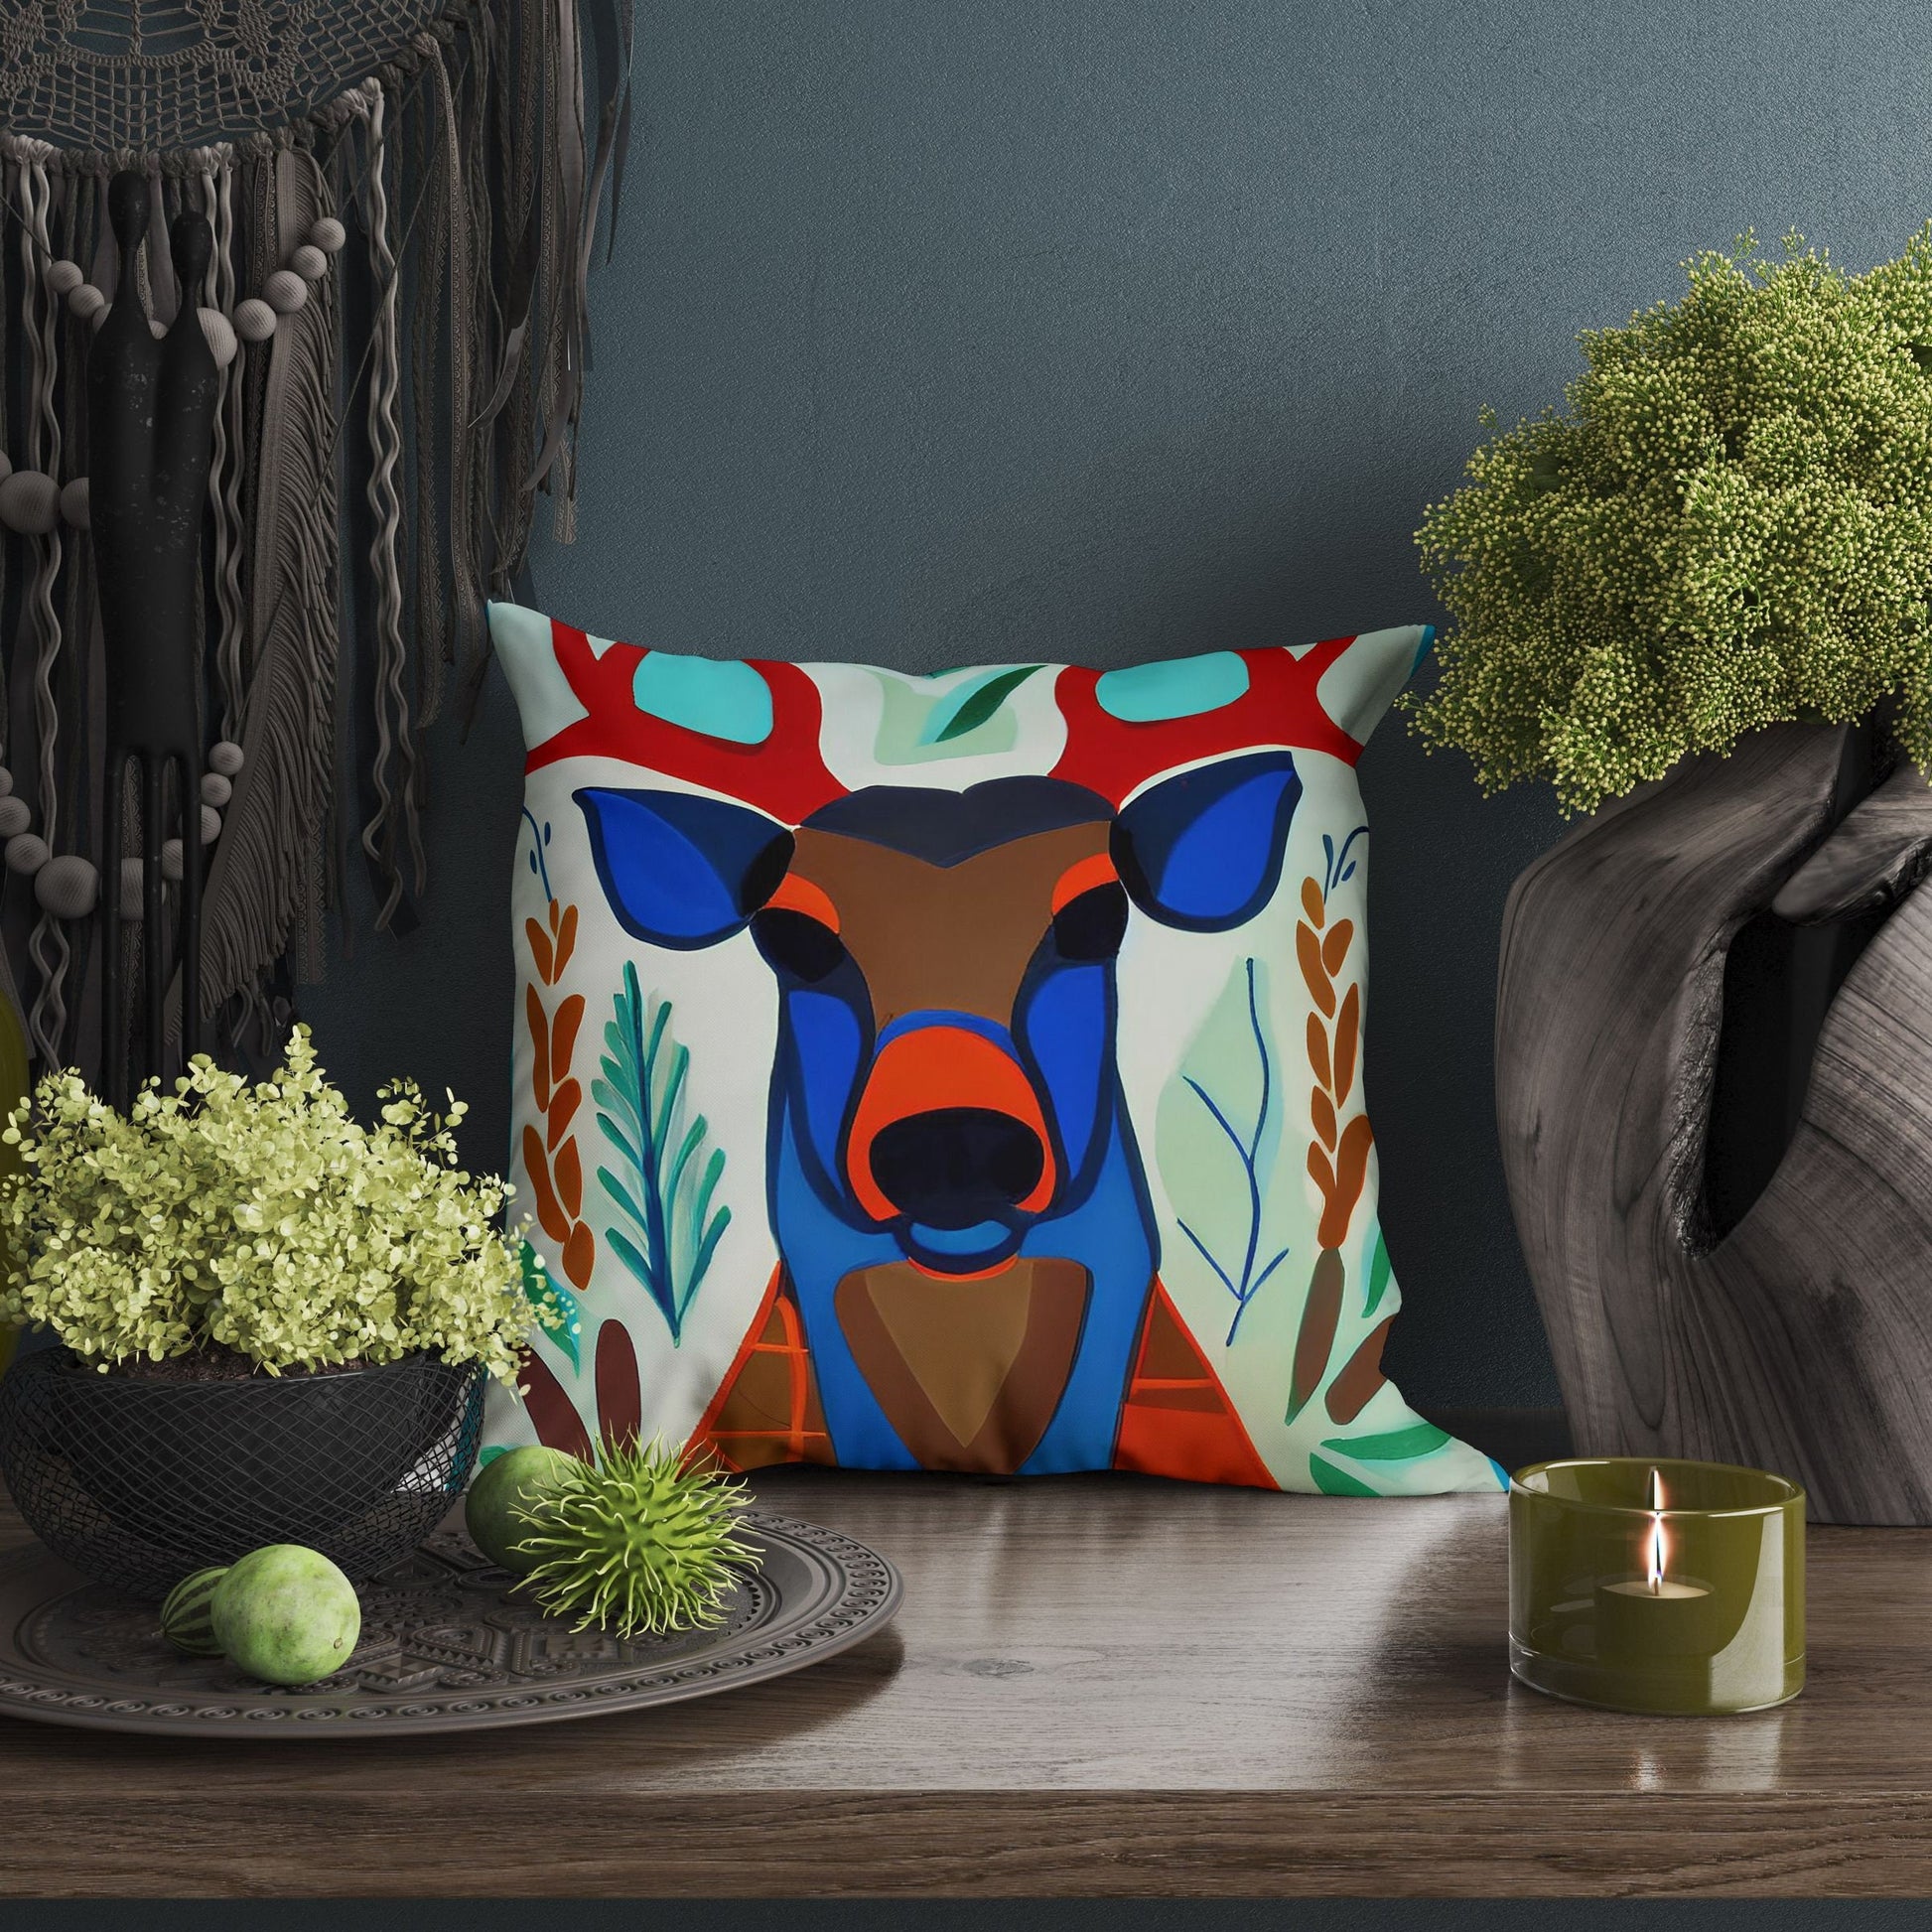 Original Art Wildlife Deer, Tapestry Pillows, Abstract Pillow Case, Artist Pillow, Colorful Pillow Case, Fashion, Square Pillow